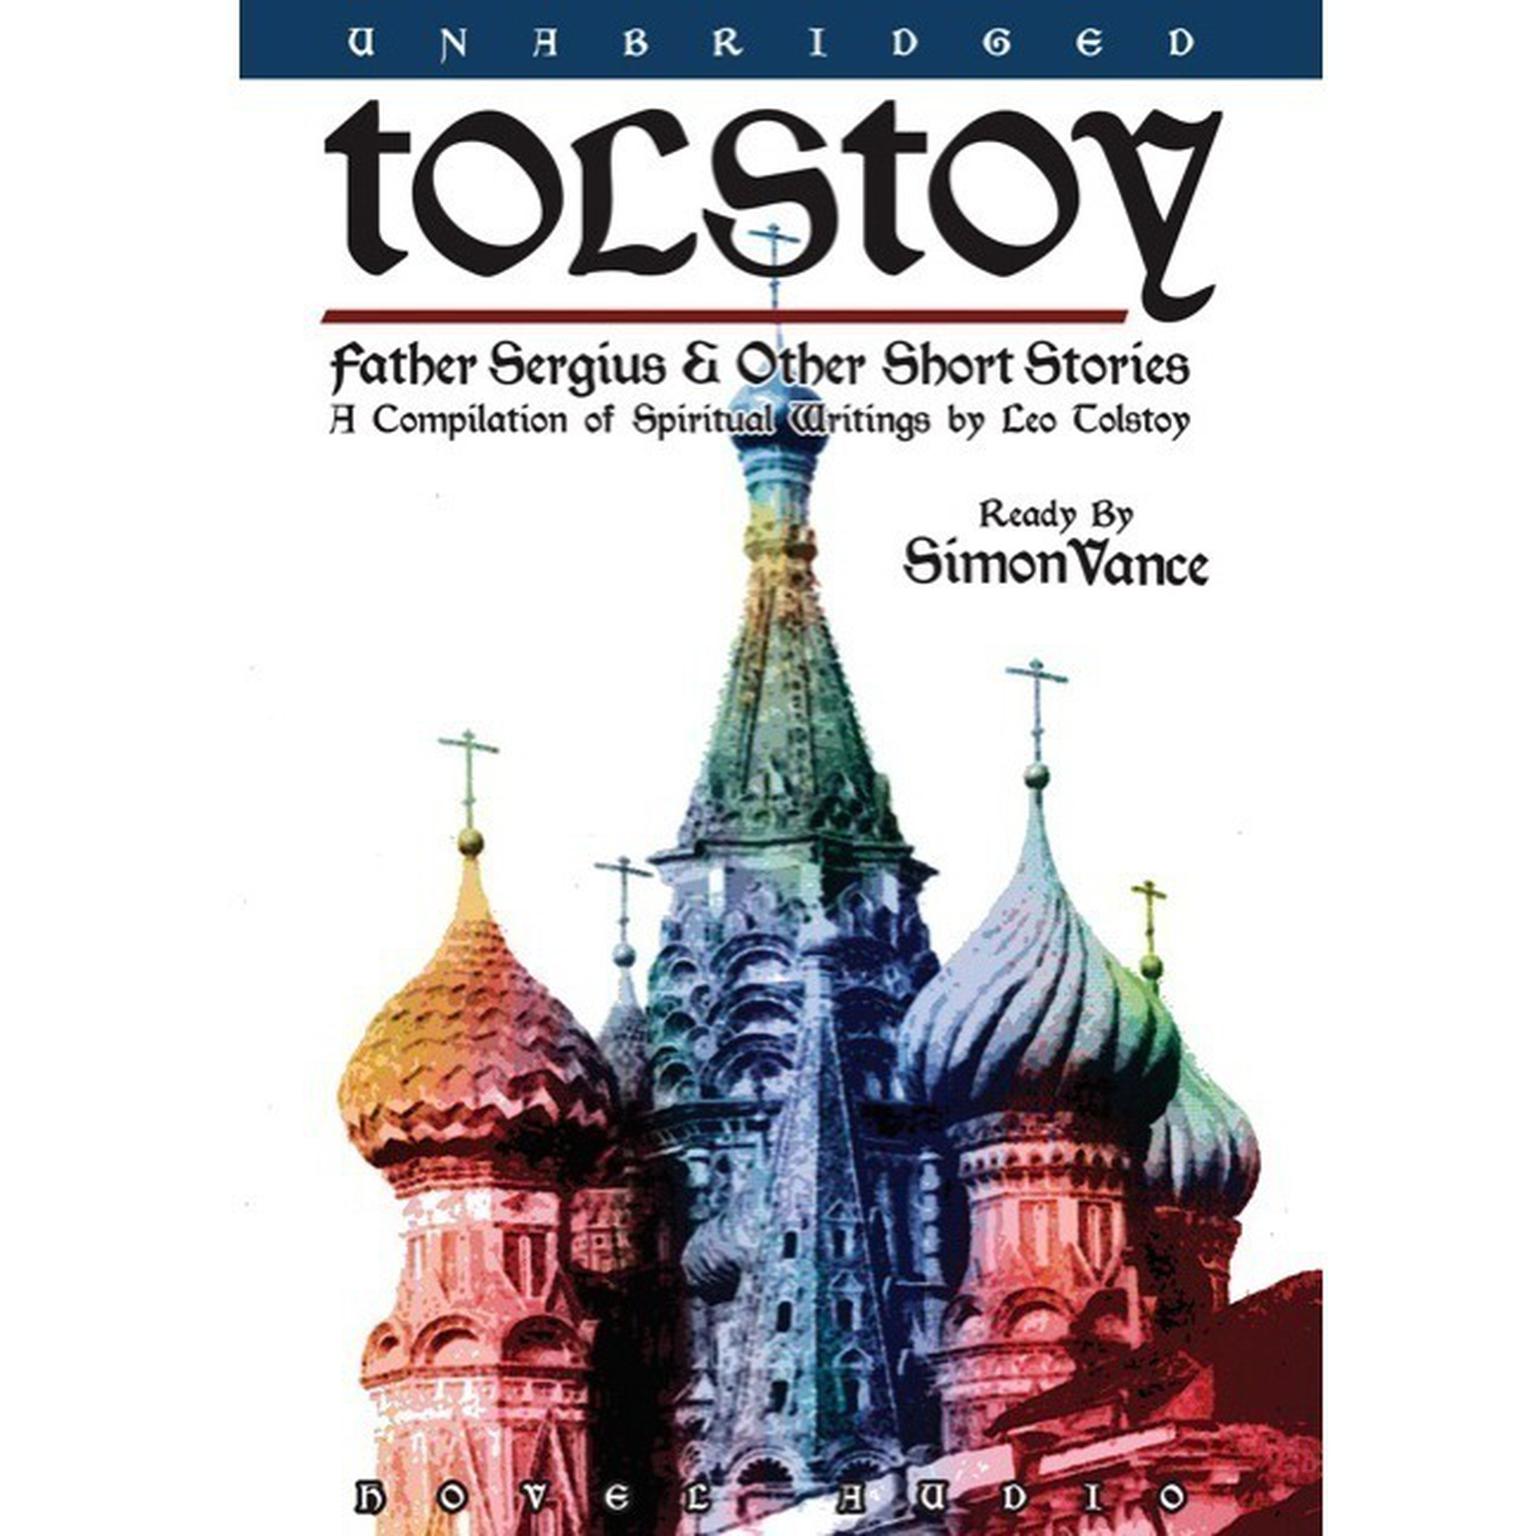 Tolstoy: Father Sergius & Other Short Stories Audiobook, by Leo Tolstoy